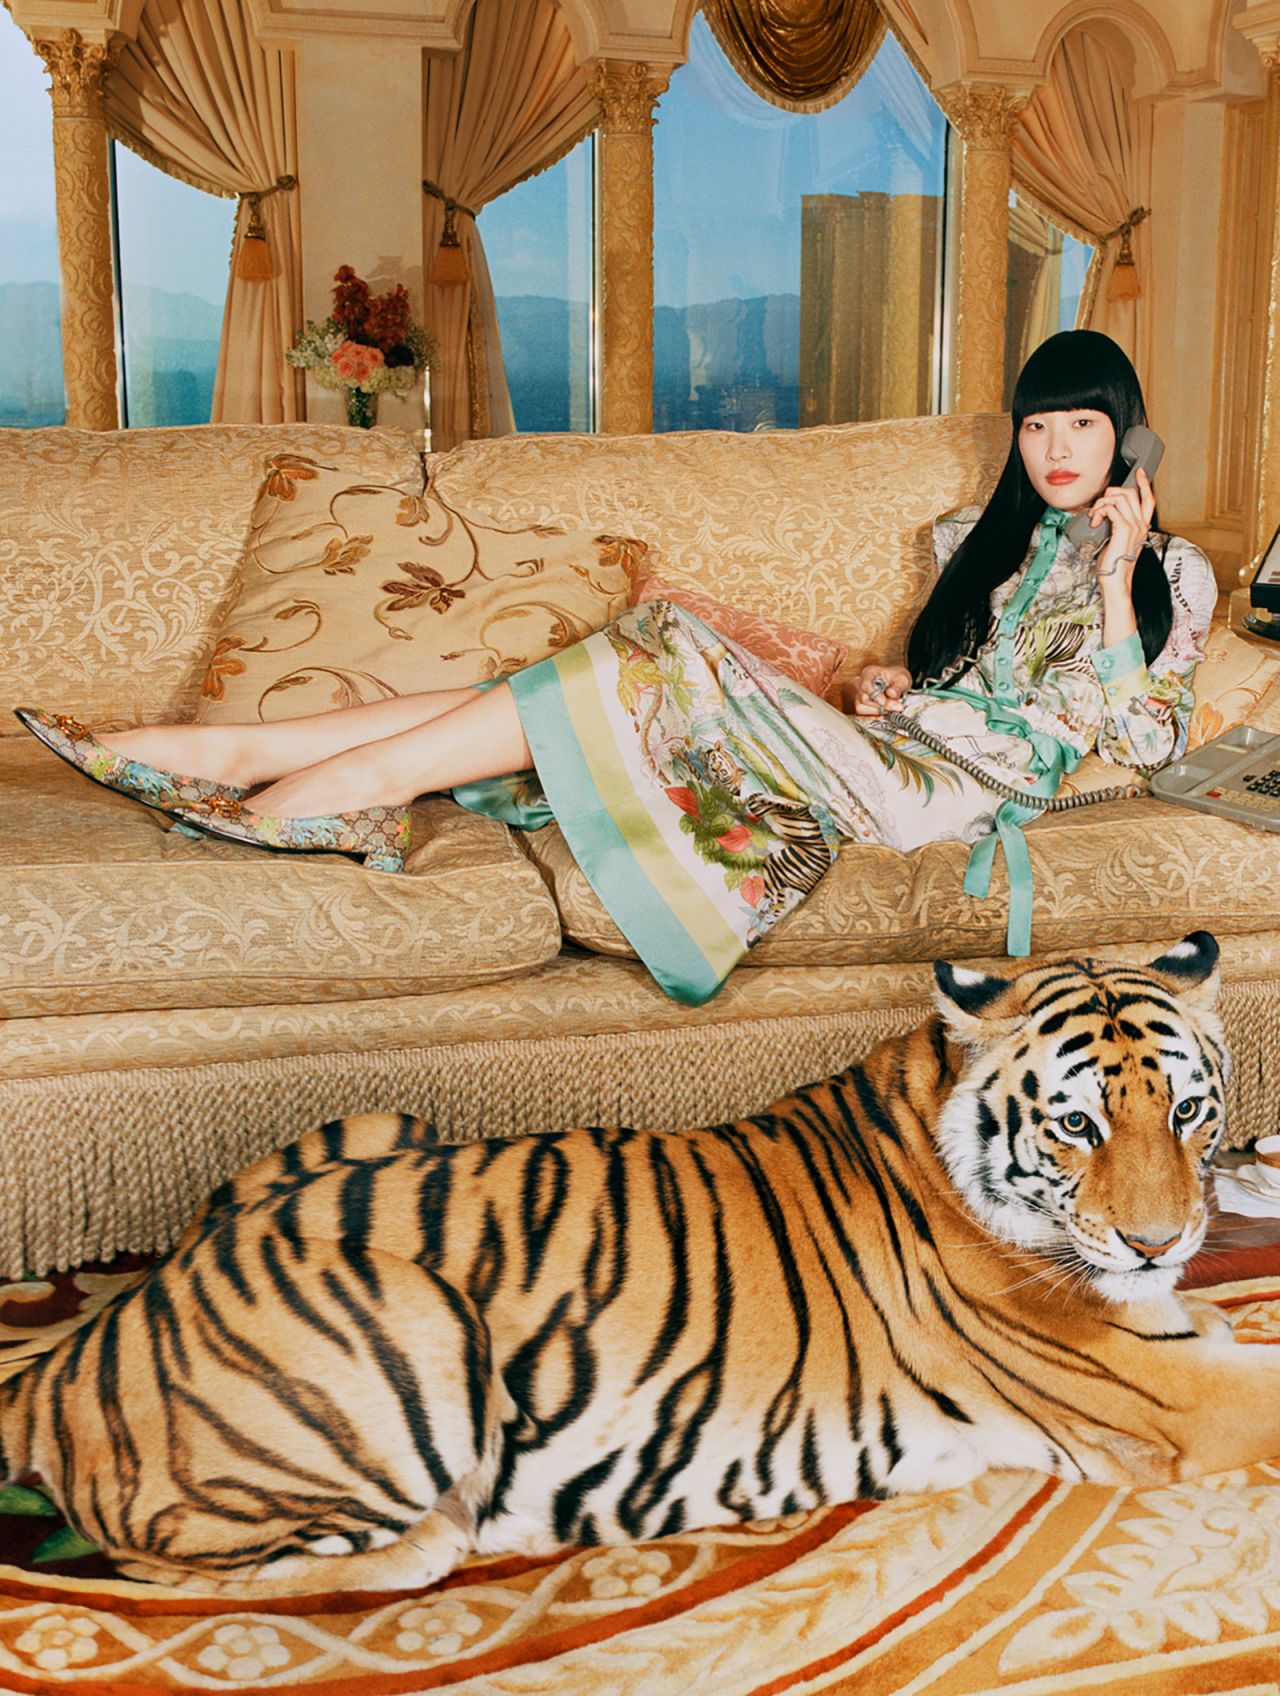 A promotional image from Gucci's festive Lunar New Year campaign.